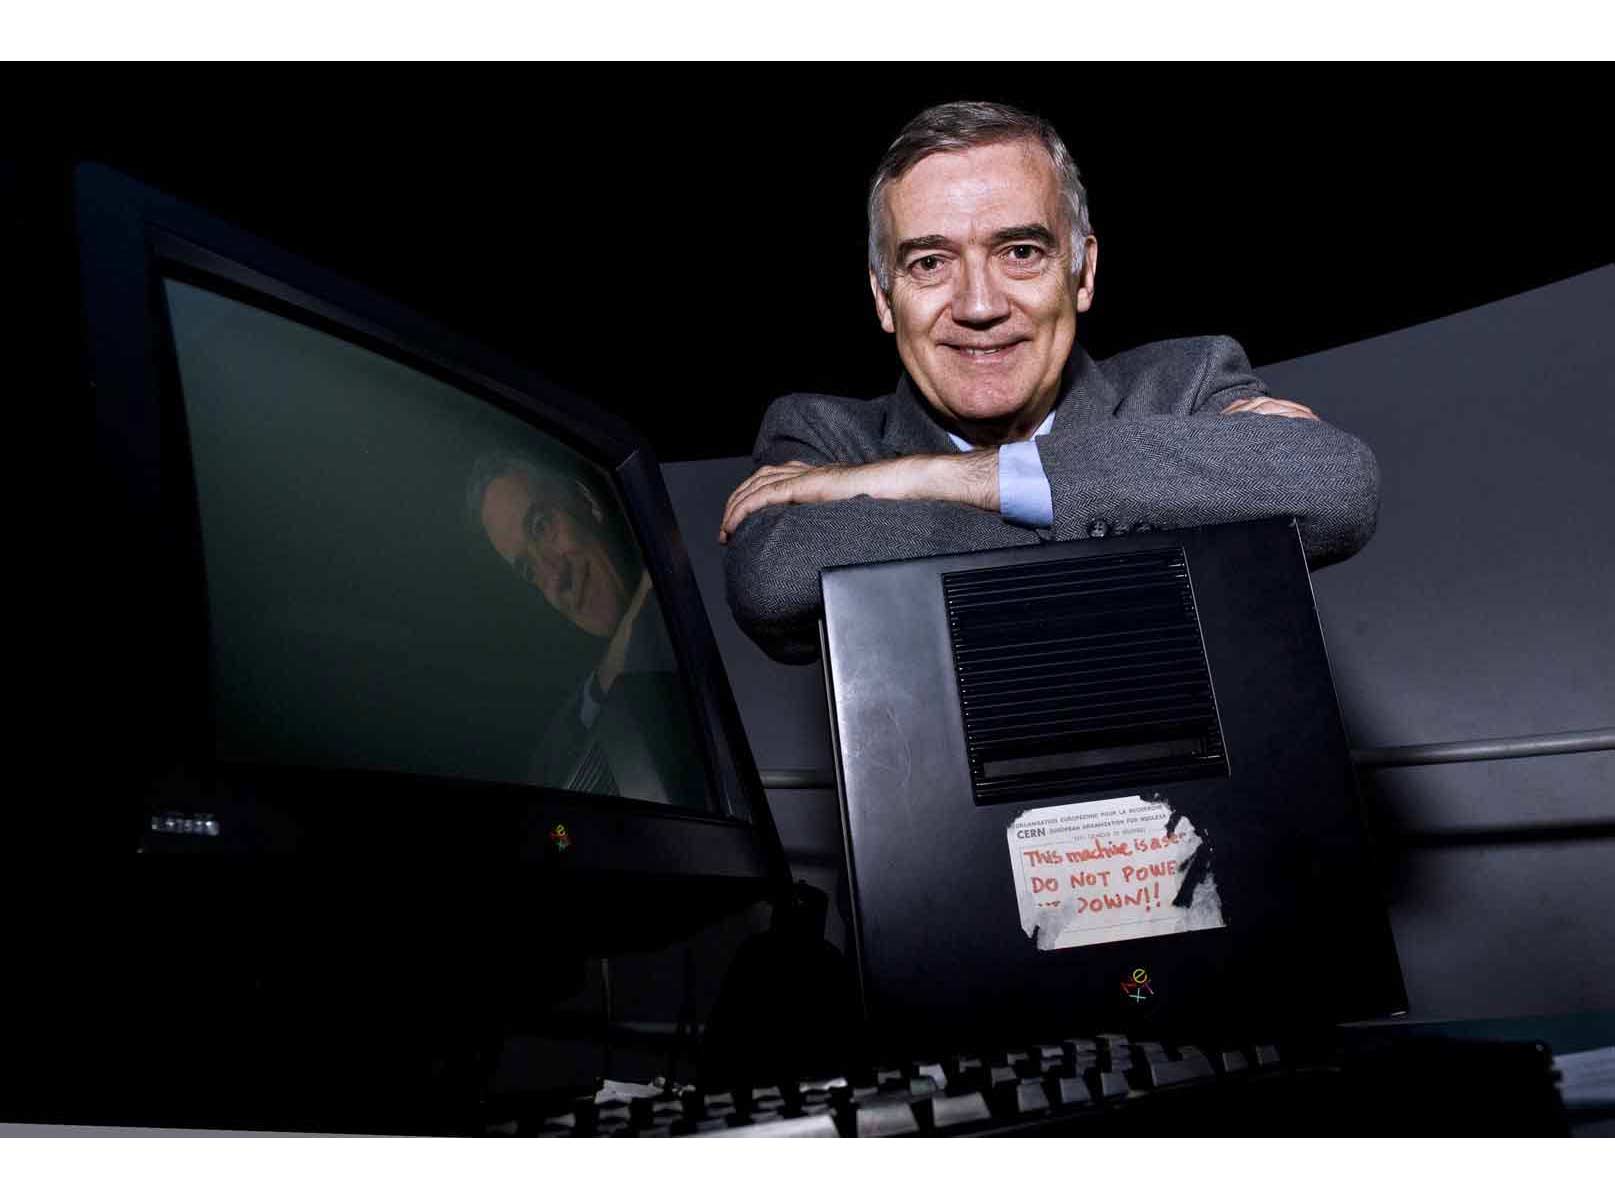 Robert Cailliau, with the world's first web server